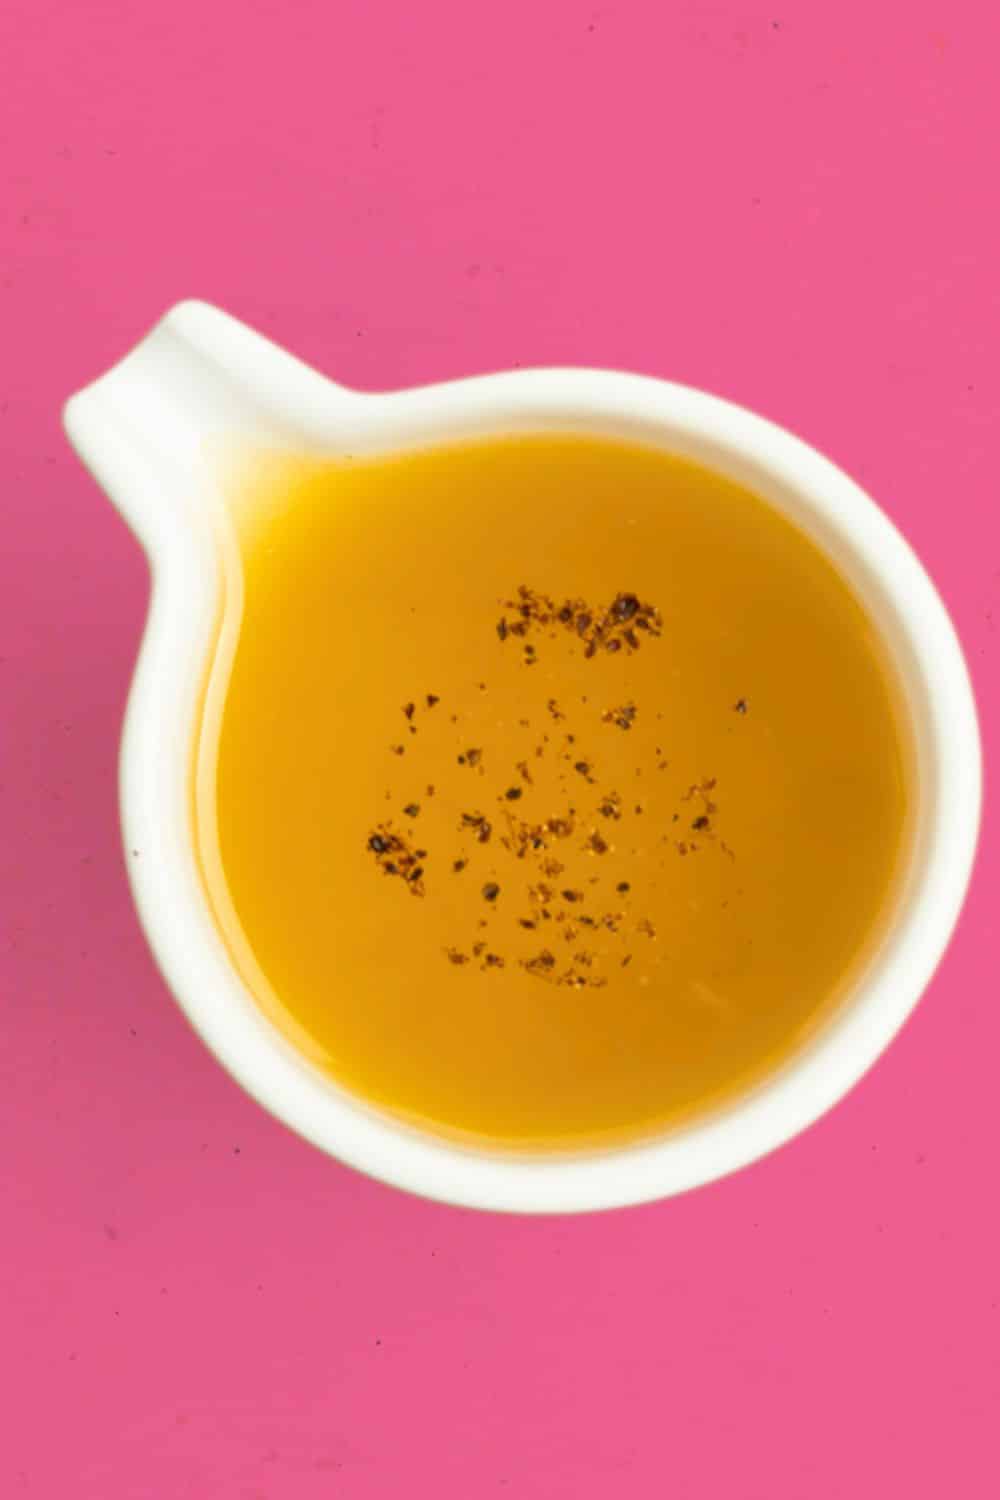 Top-down view of orange vinaigrette in a white container against a bright pink background